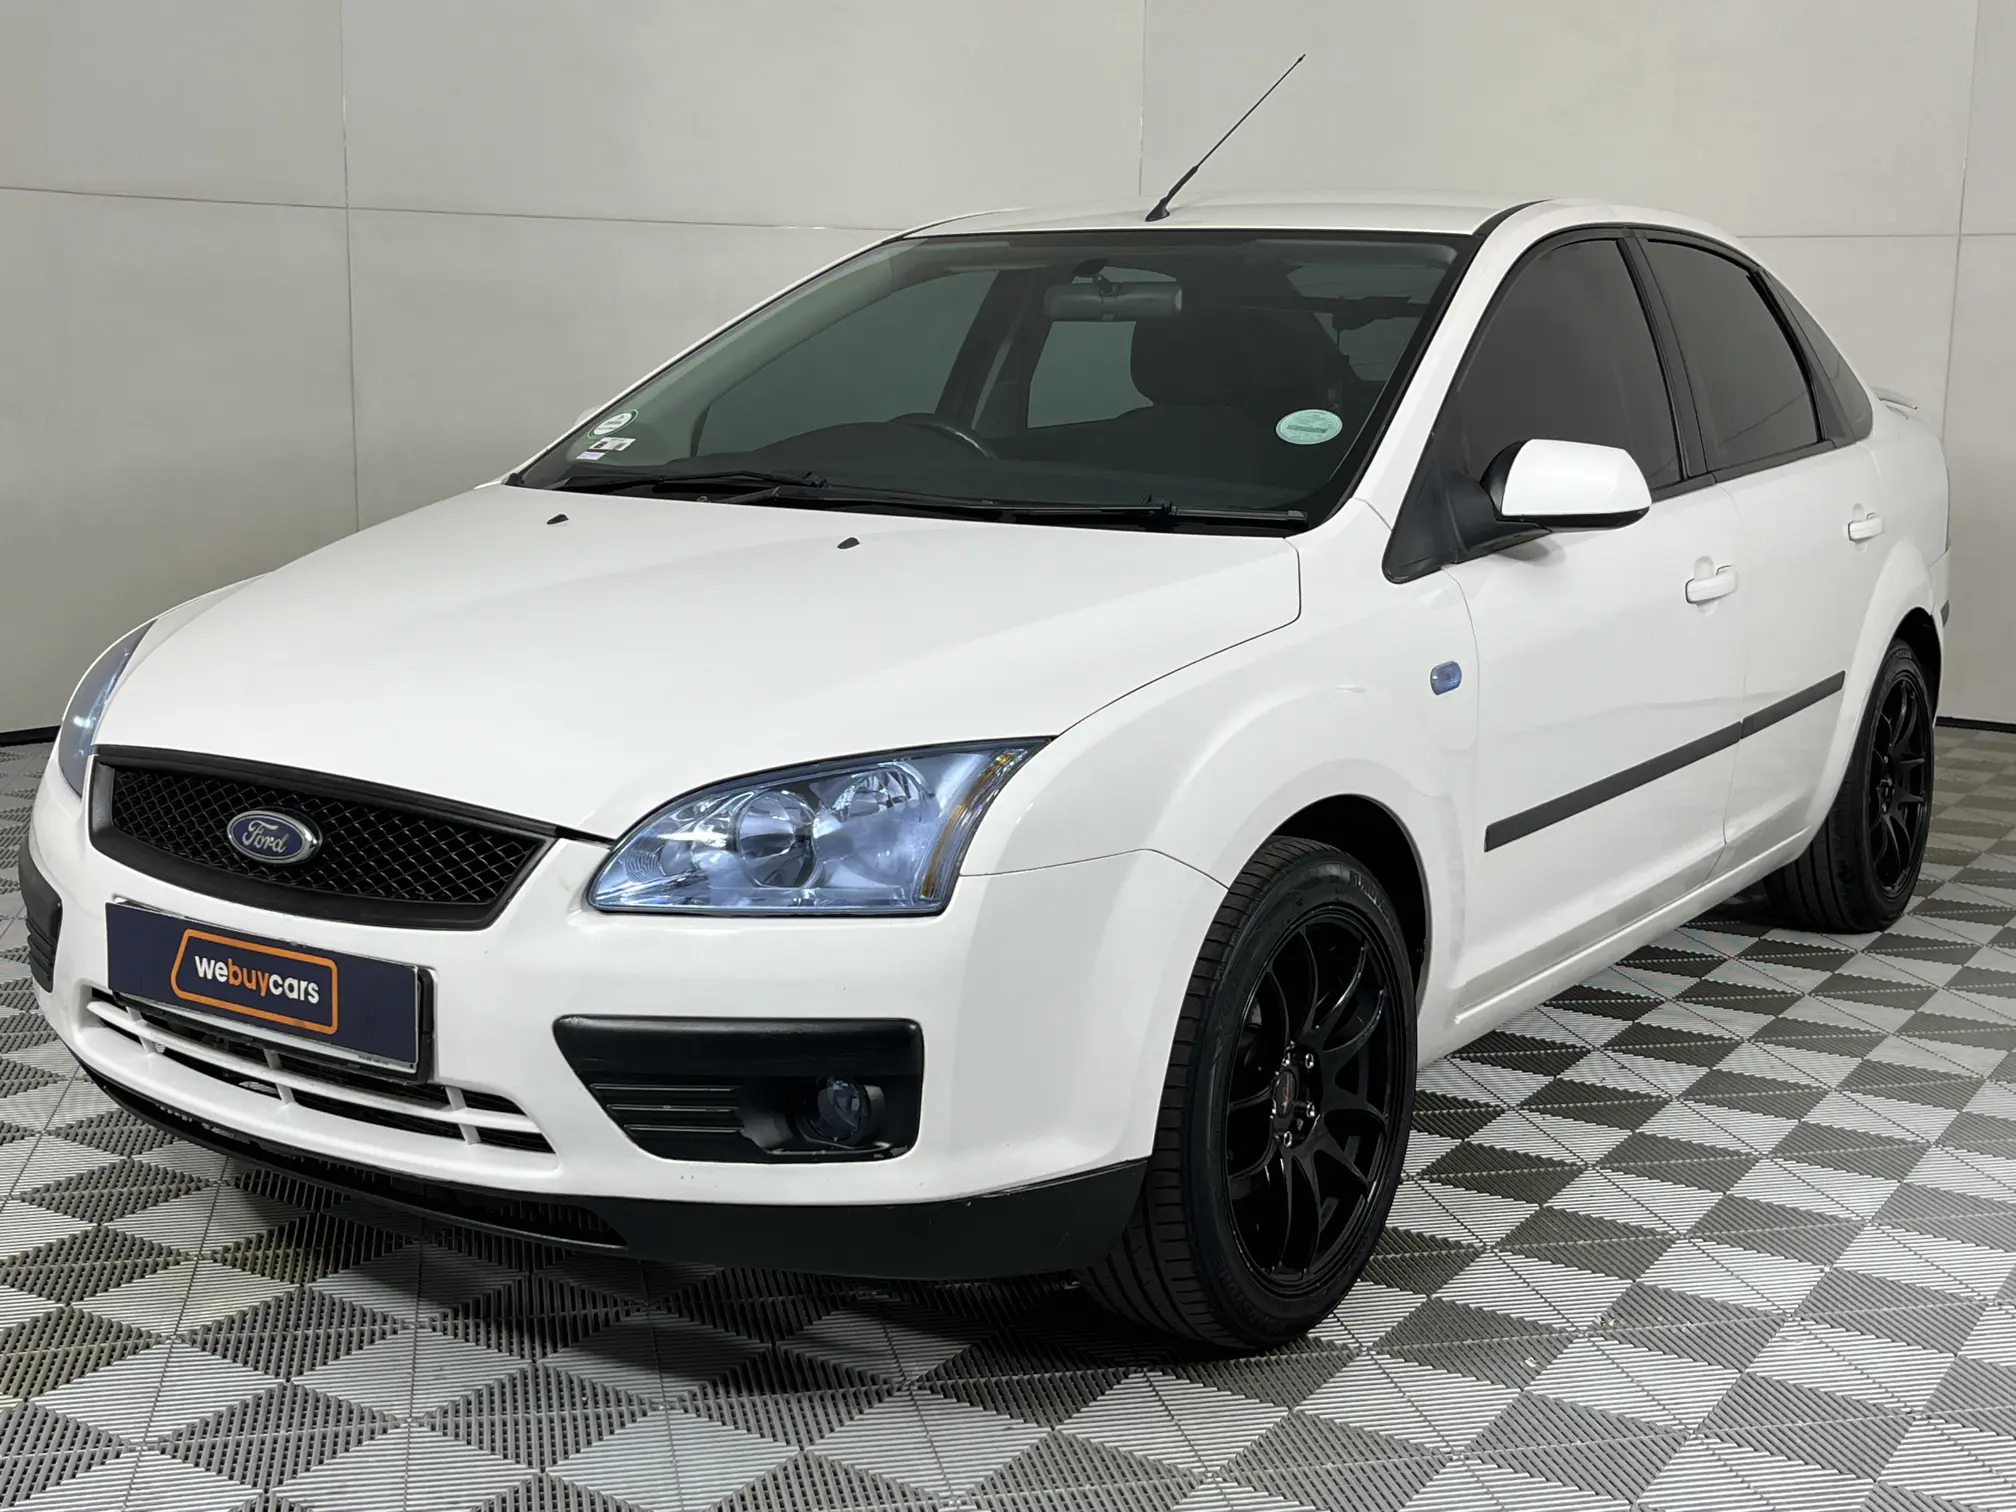 2005 Ford Focus 2.0 Trend